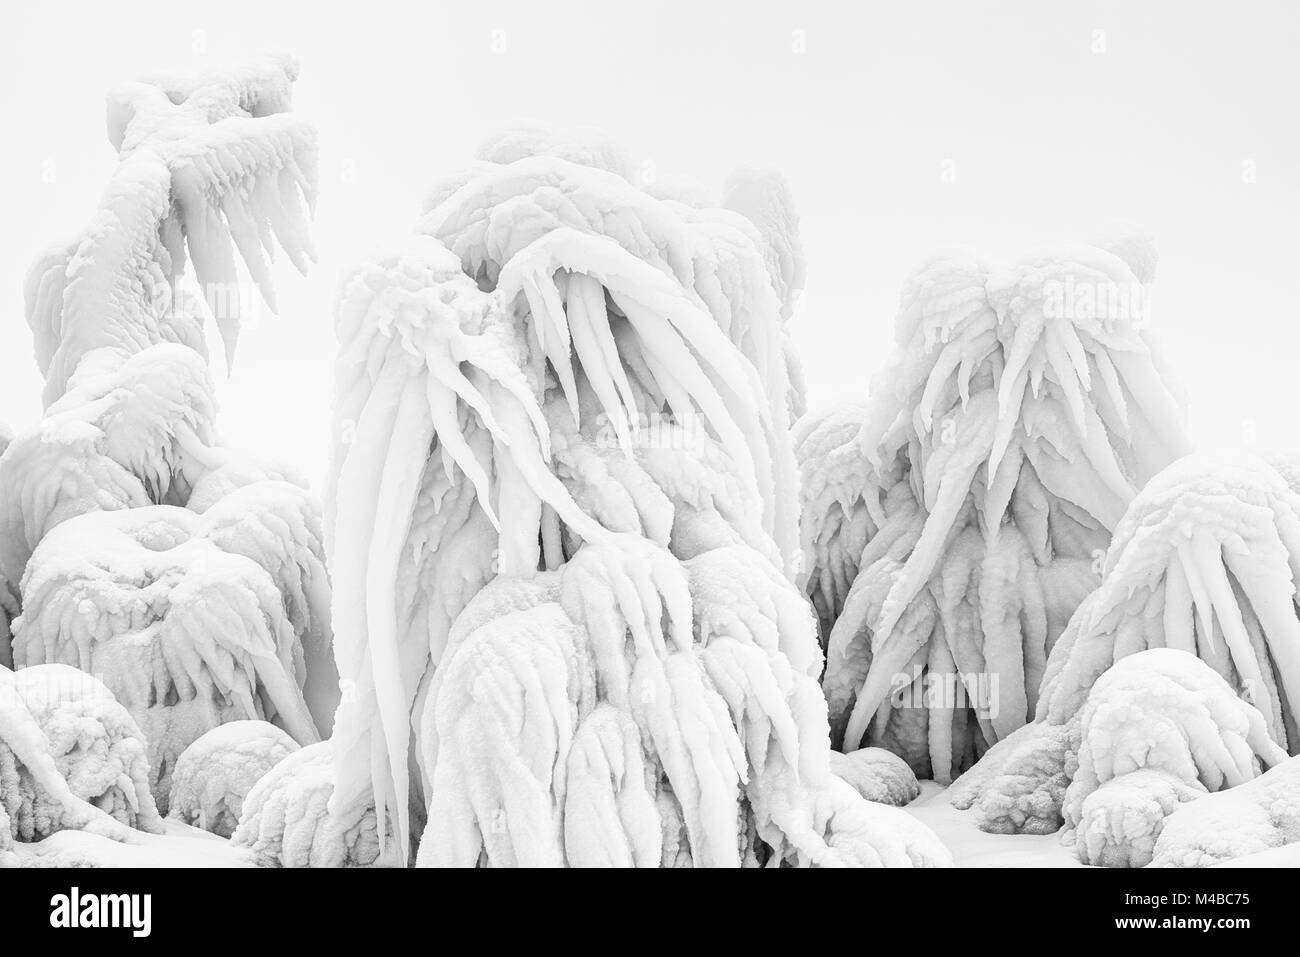 Ice formations, Lake Tornetraesk, Lapland, Sweden Stock Photo